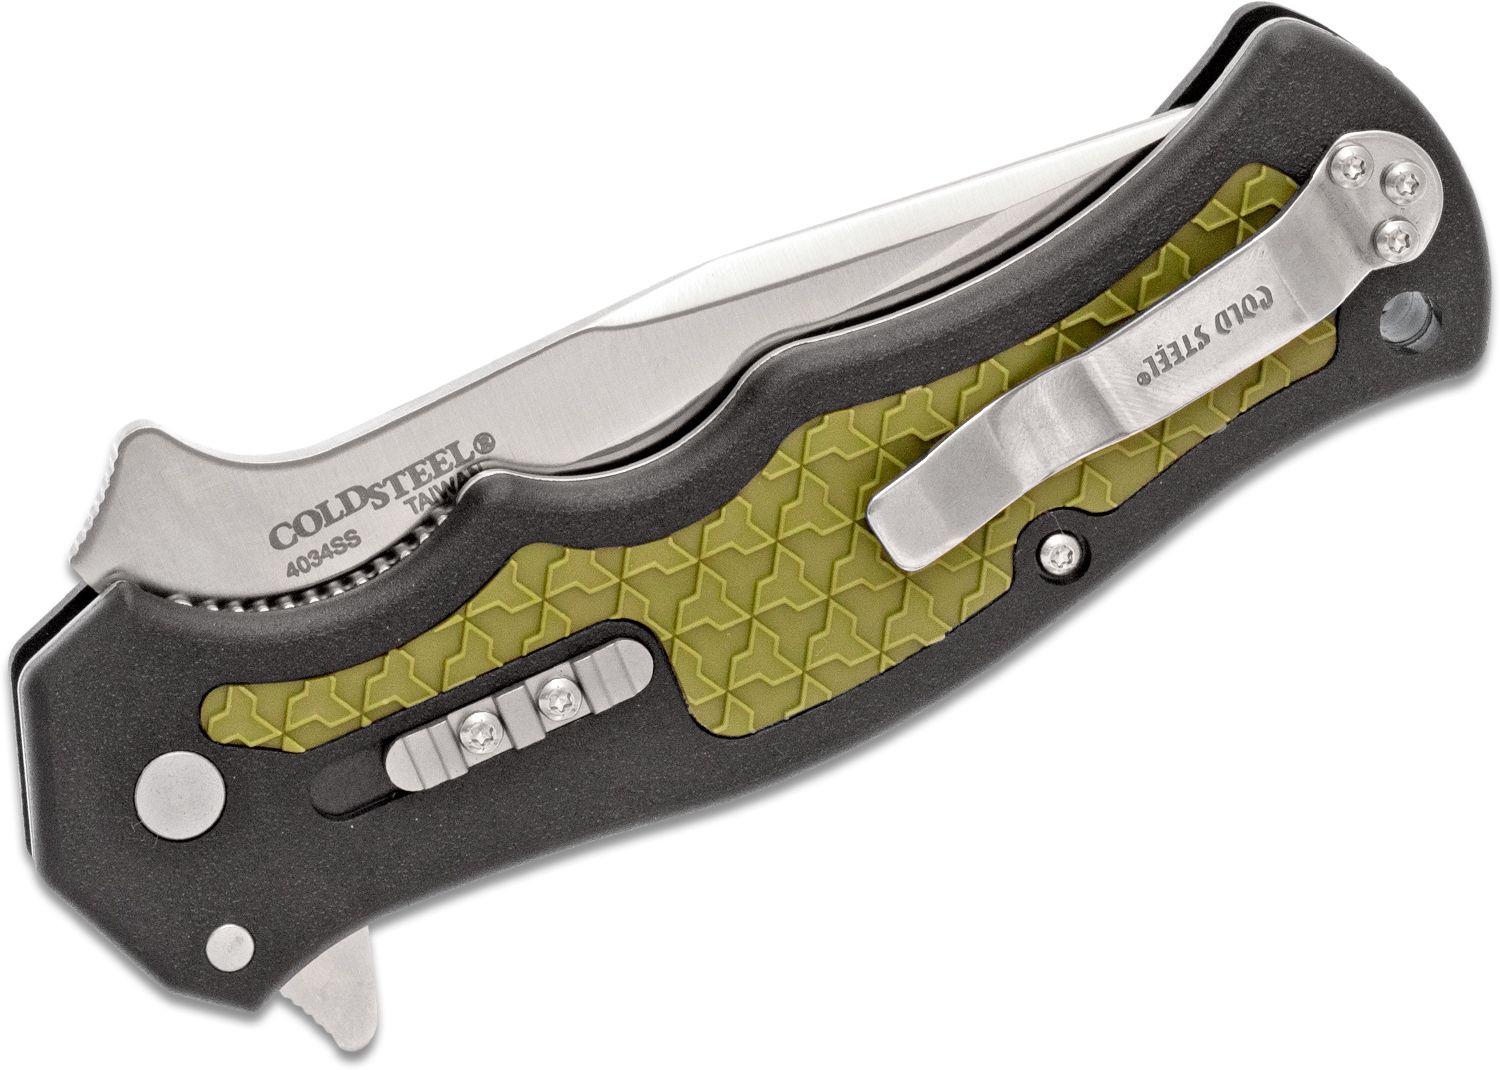 New Crawford 1 Folding EDC Blade from Cold Steel Knives